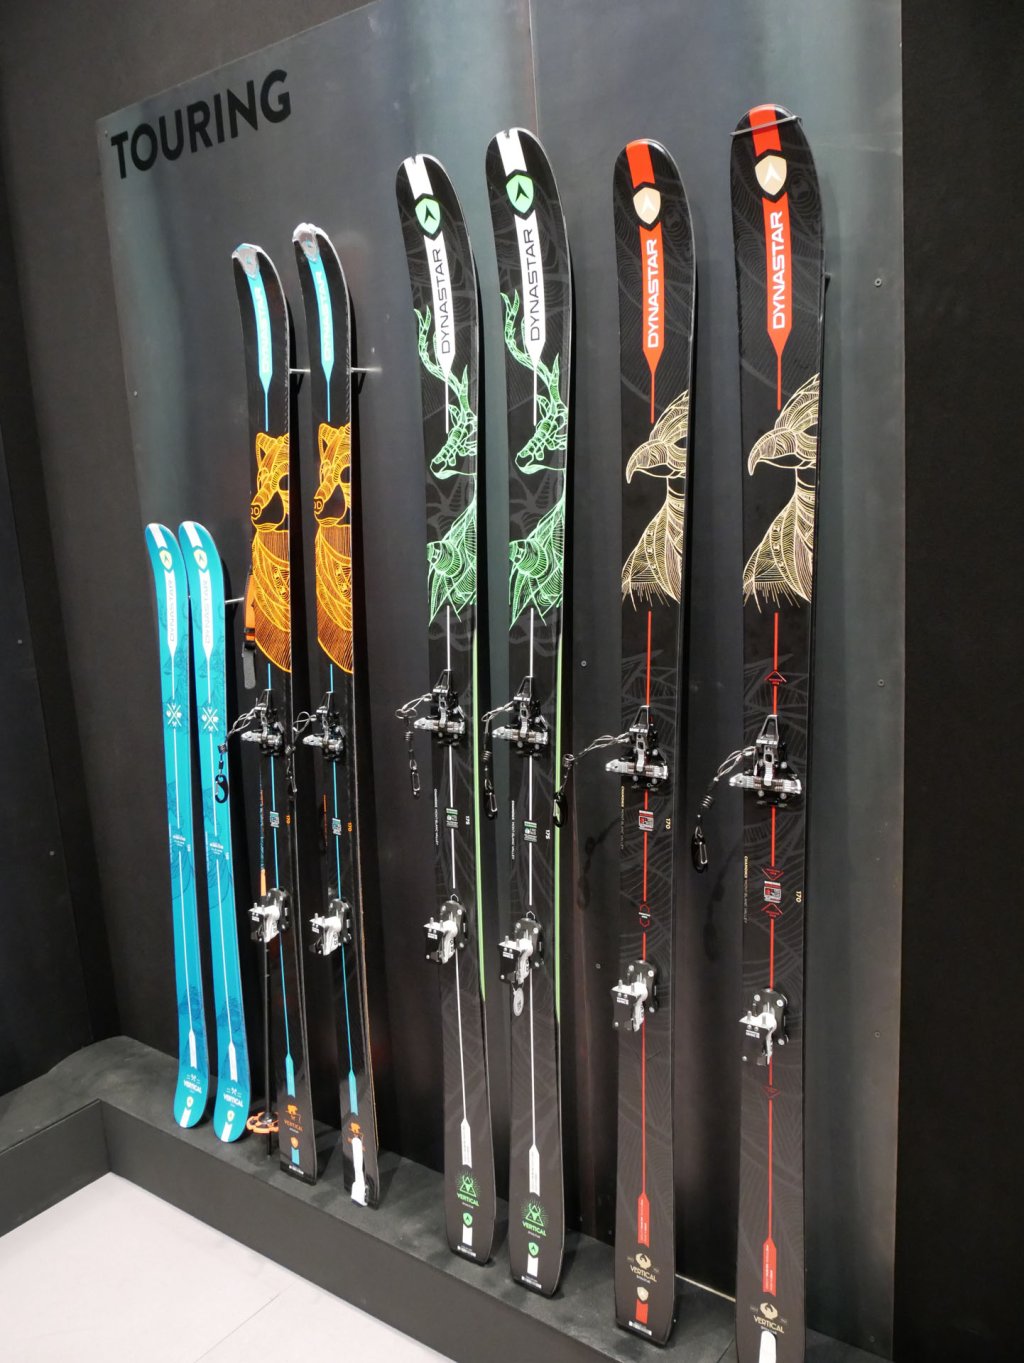 Dynastar Vertical - from the more affordable entry-level model with cap construction (left) to the high-end sandwich ski (right)